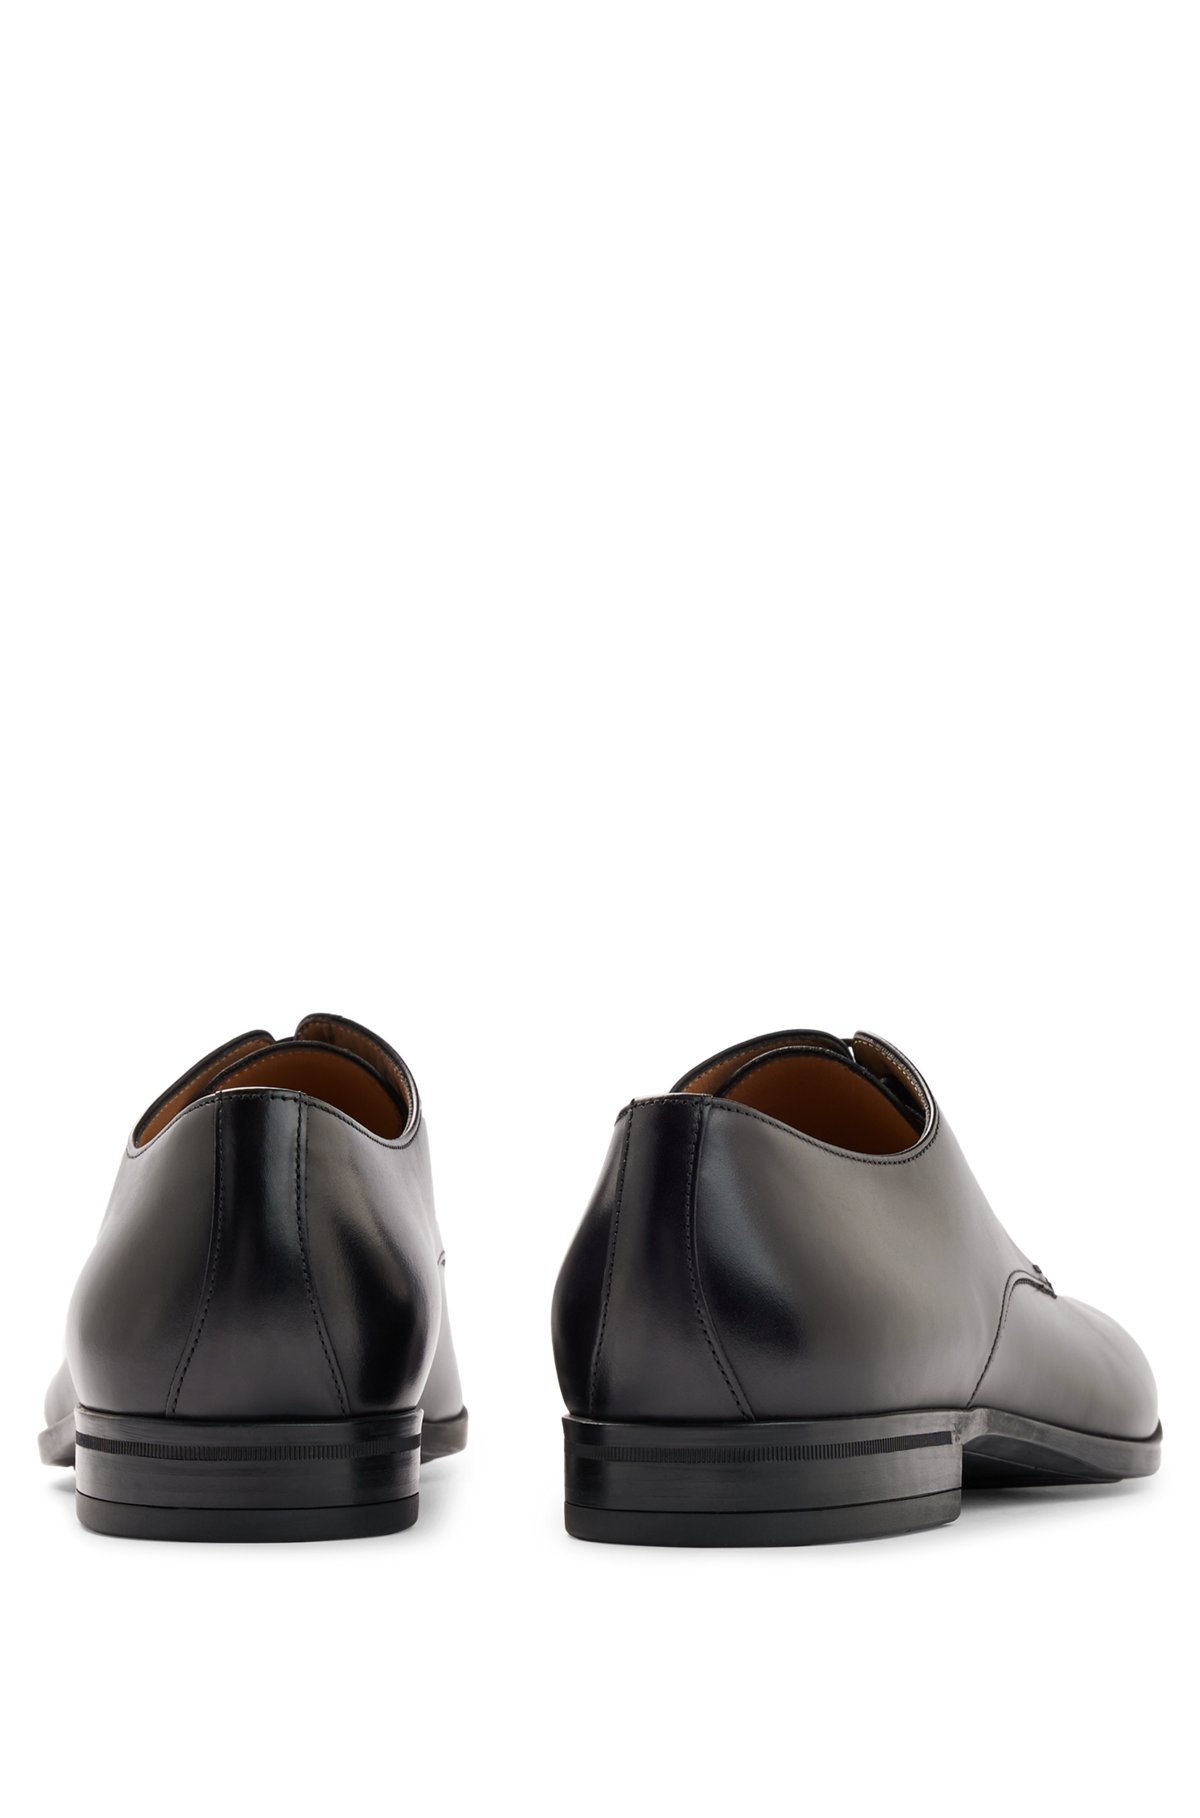 Komst Rijp Azië BOSS - Italian-made Derby shoes in vegetable-tanned leather